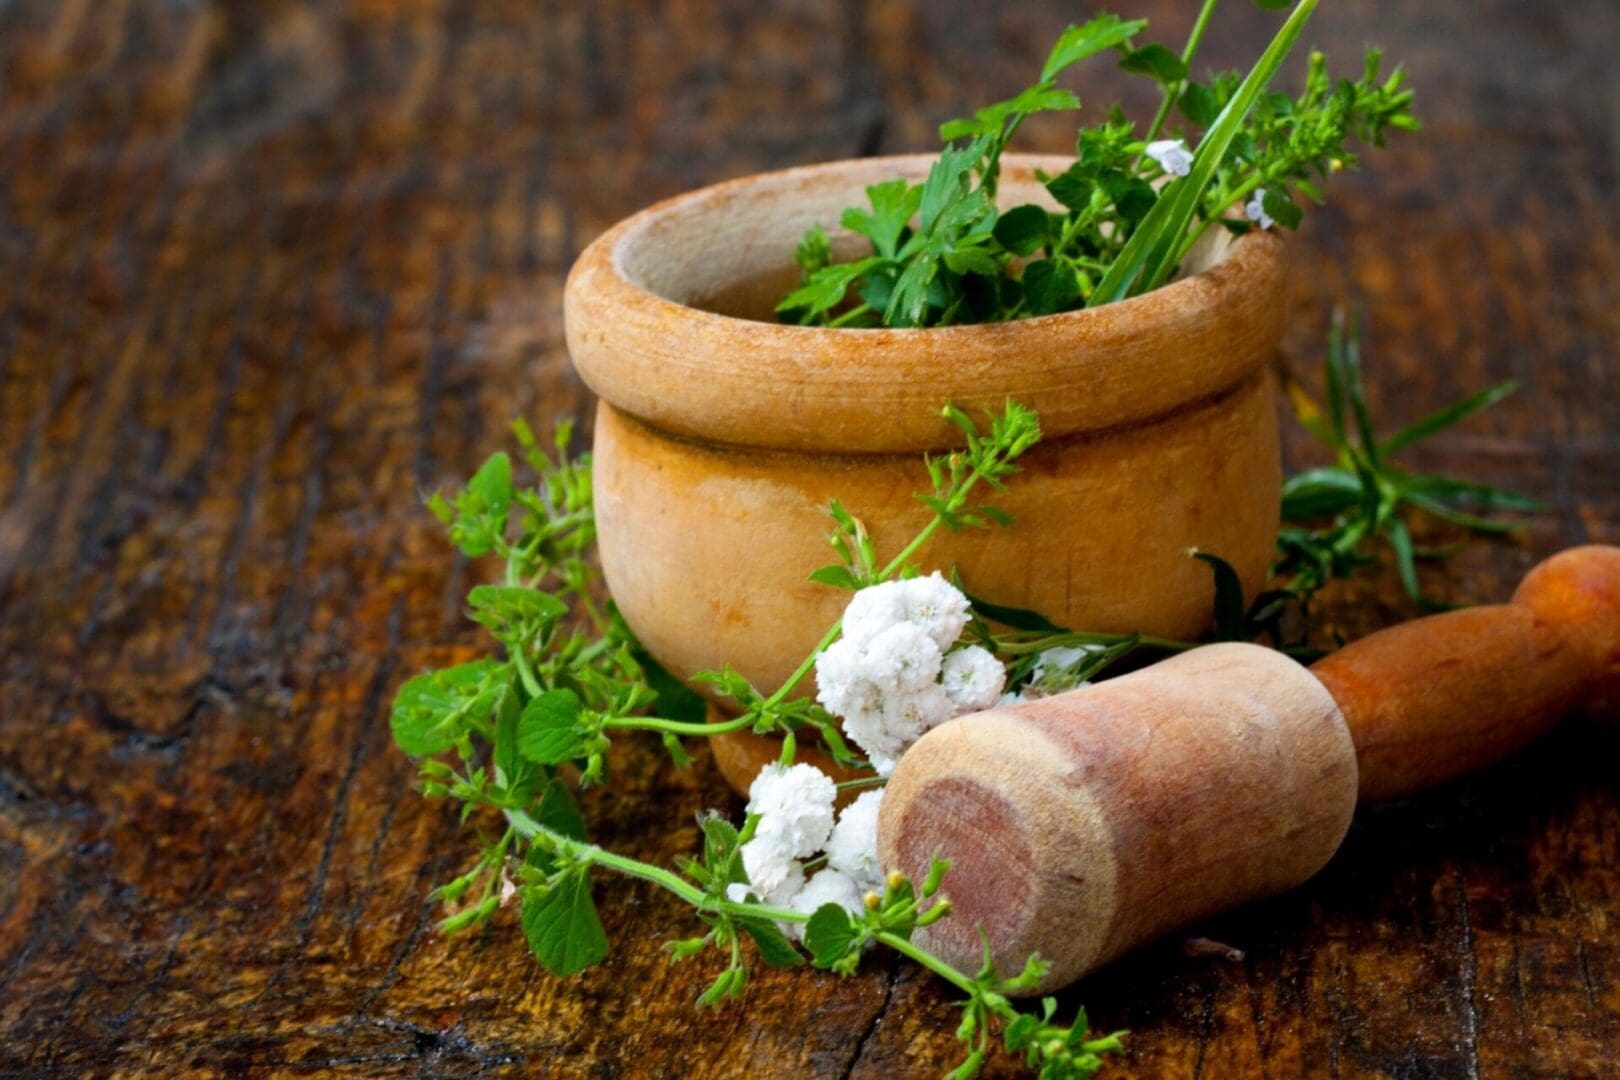 A wooden bowl with herbs and a cork on it.